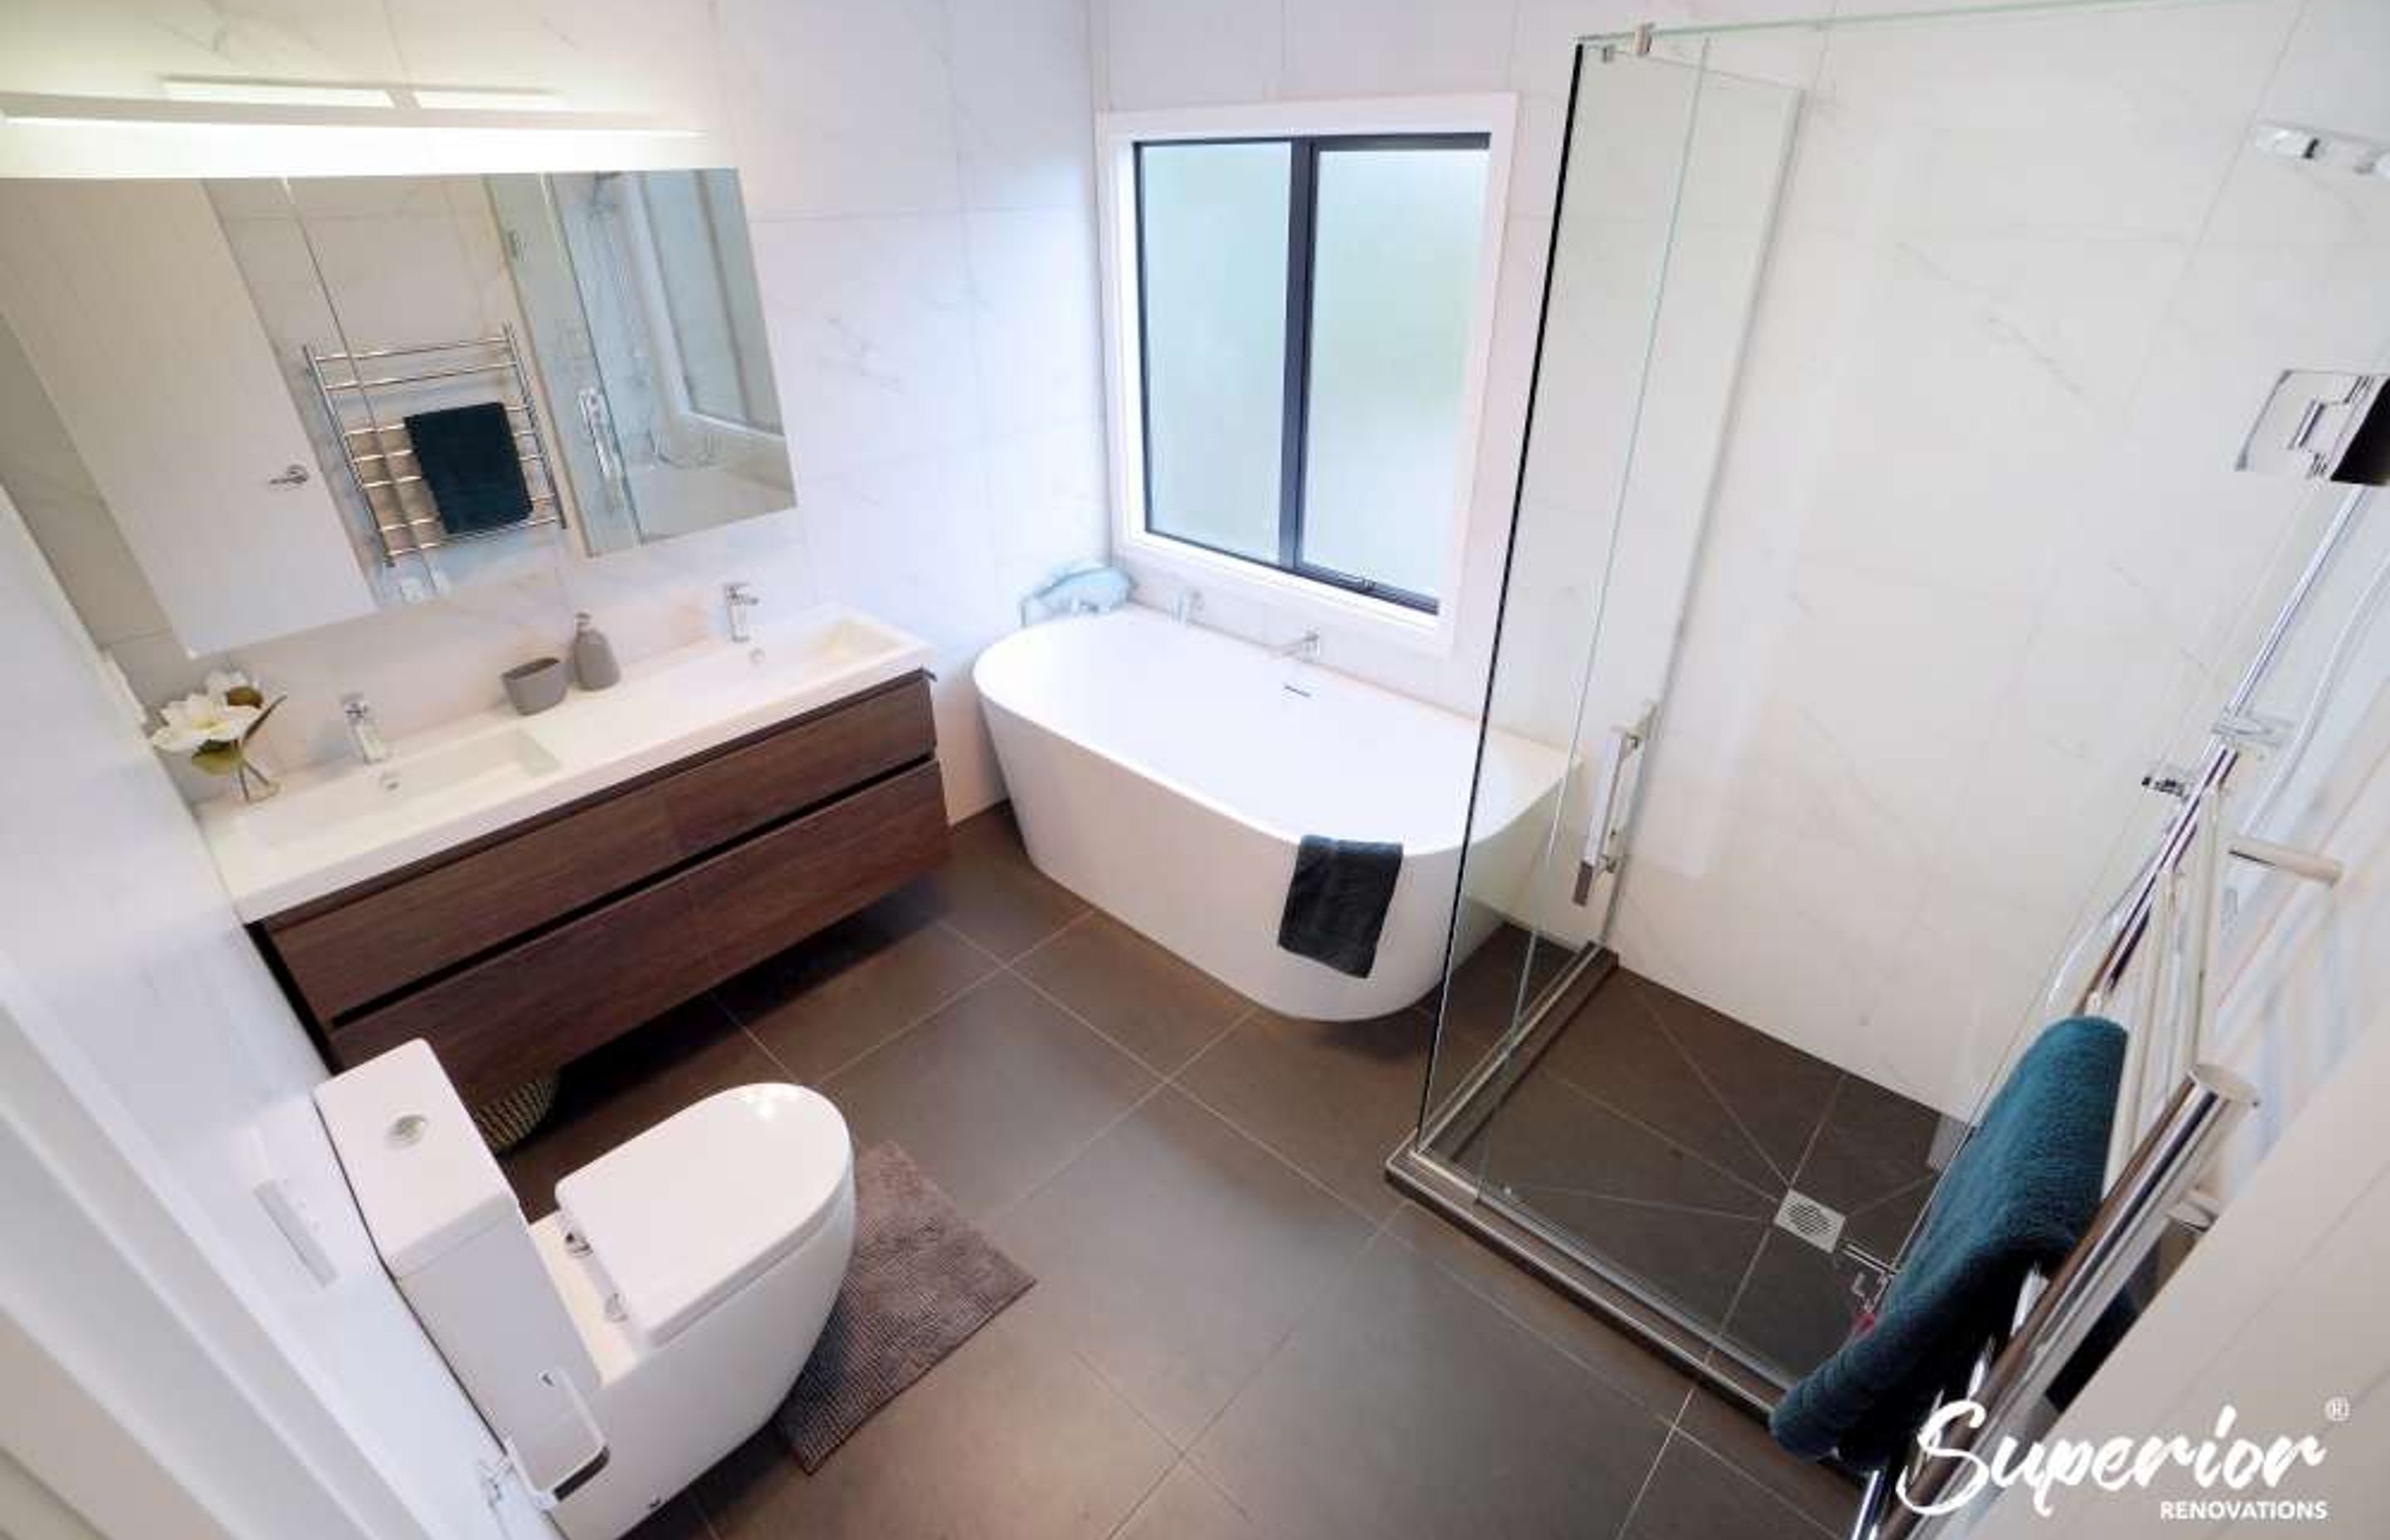 Dark brown 600 by 600 tiles were installed on the floors whereas white 600 by 600 tiles were installed on the walls to make the bathroom look spacious as well as create some drama